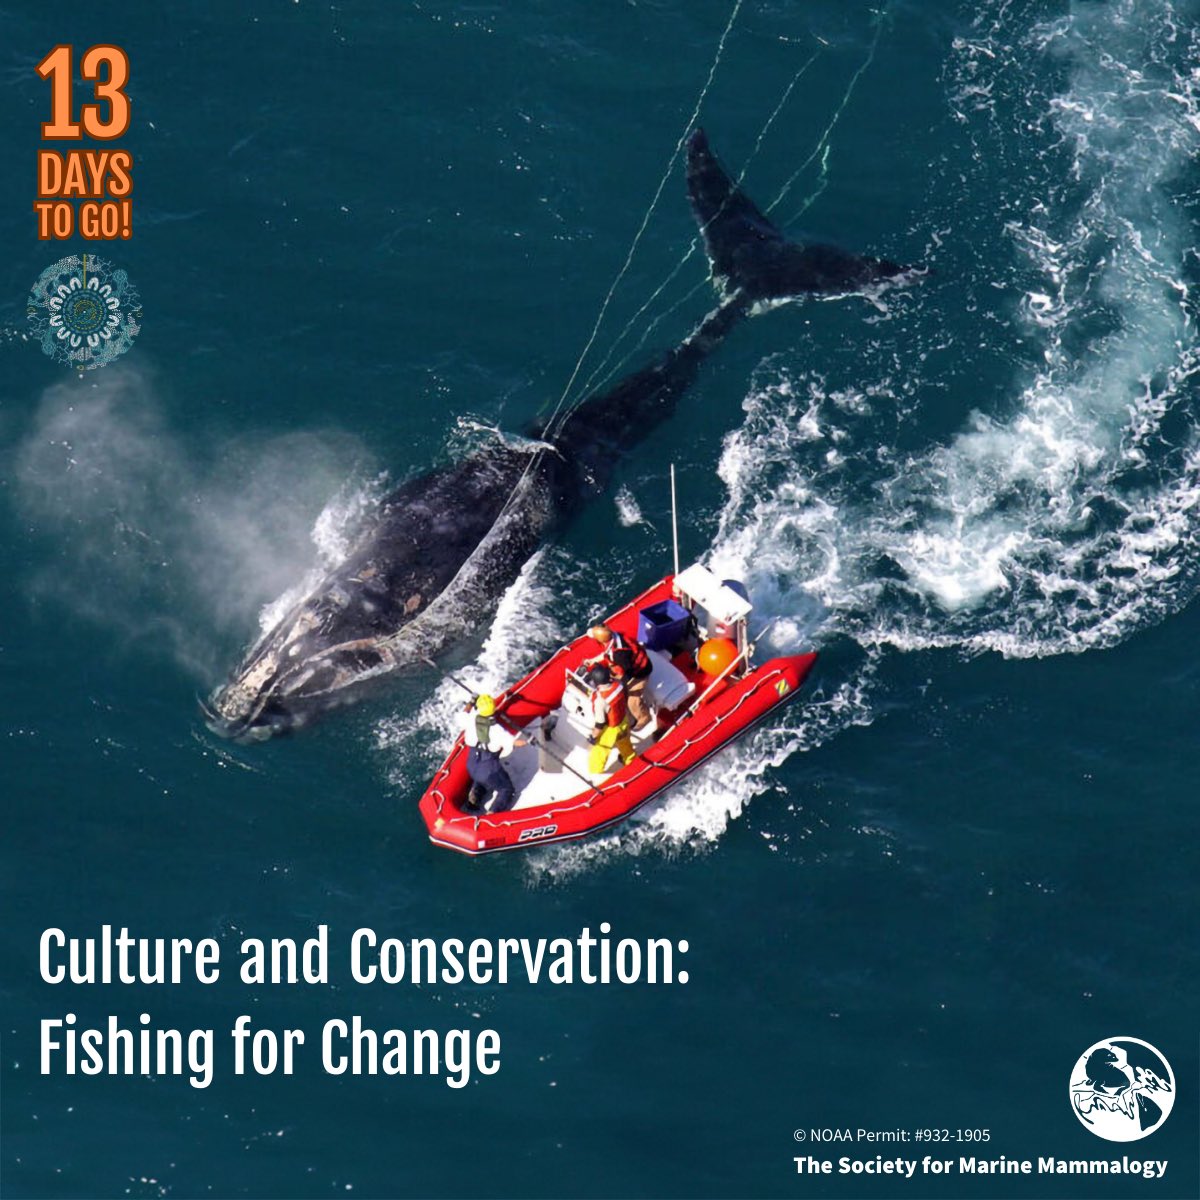 Countdown alert! Submit your abstract/workshop, or sign up as a reviewer for #PerthSMM2024 by 26 March! Theme: “Culture and Conservation: Fishing for Change”. Share your insights on combating marine mammal threats. To submit, head to smmconference.org #SMM #marinemammalogy